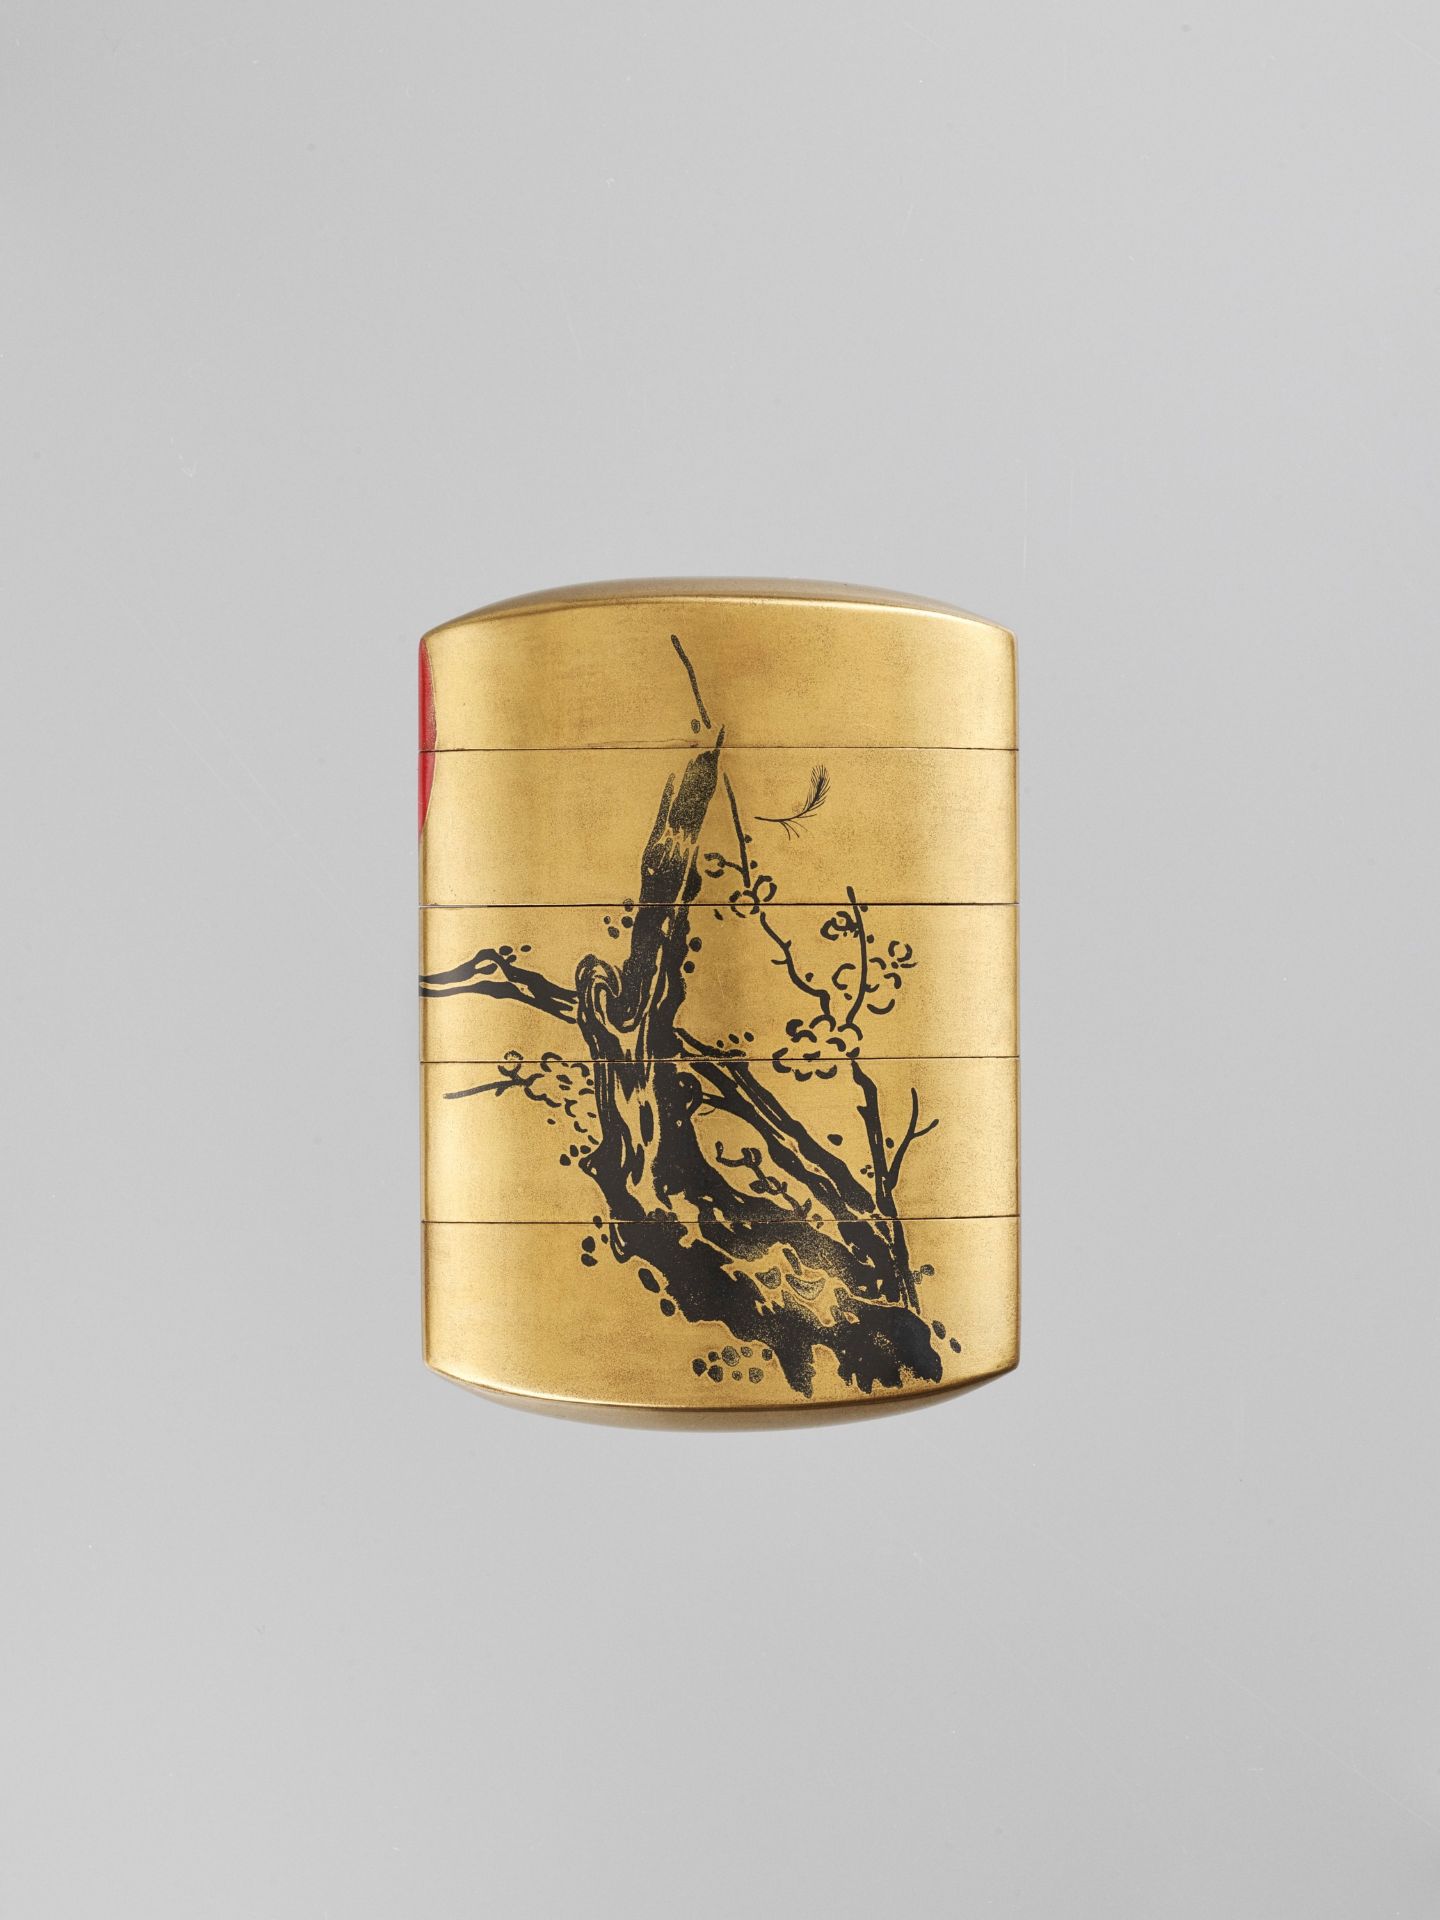 ZESHIN: A LACQUER FOUR-CASE INRO DEPICTING A CROW AGAINST A RED MOON - Image 3 of 7